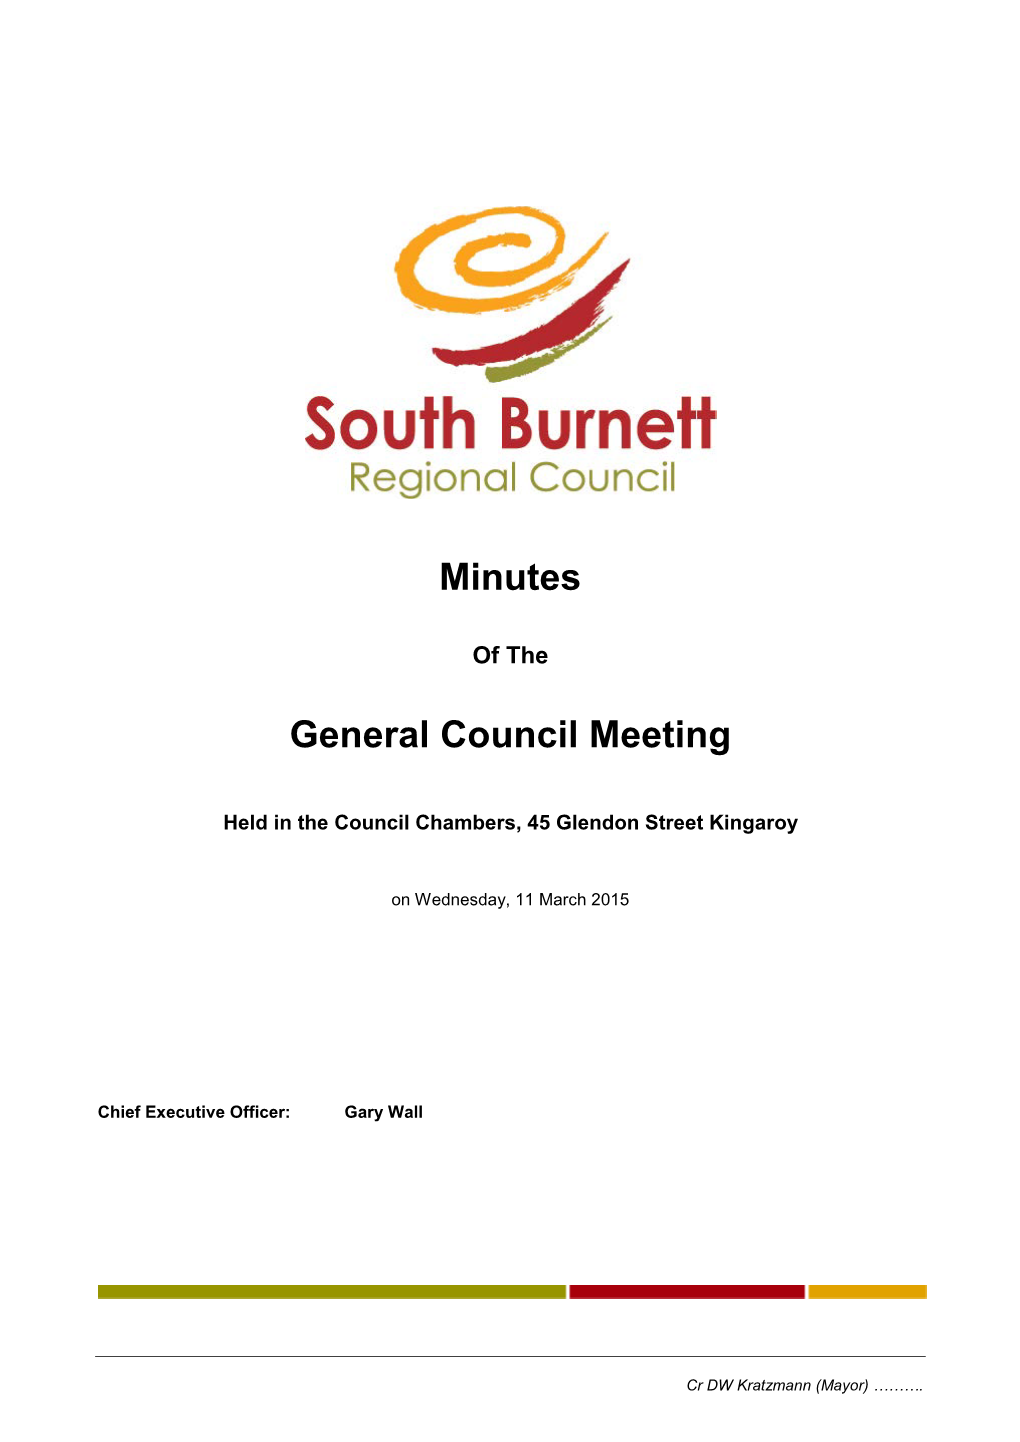 South Burnett Regional Council General Meeting – Minutes - Wednesday 11 March 2015